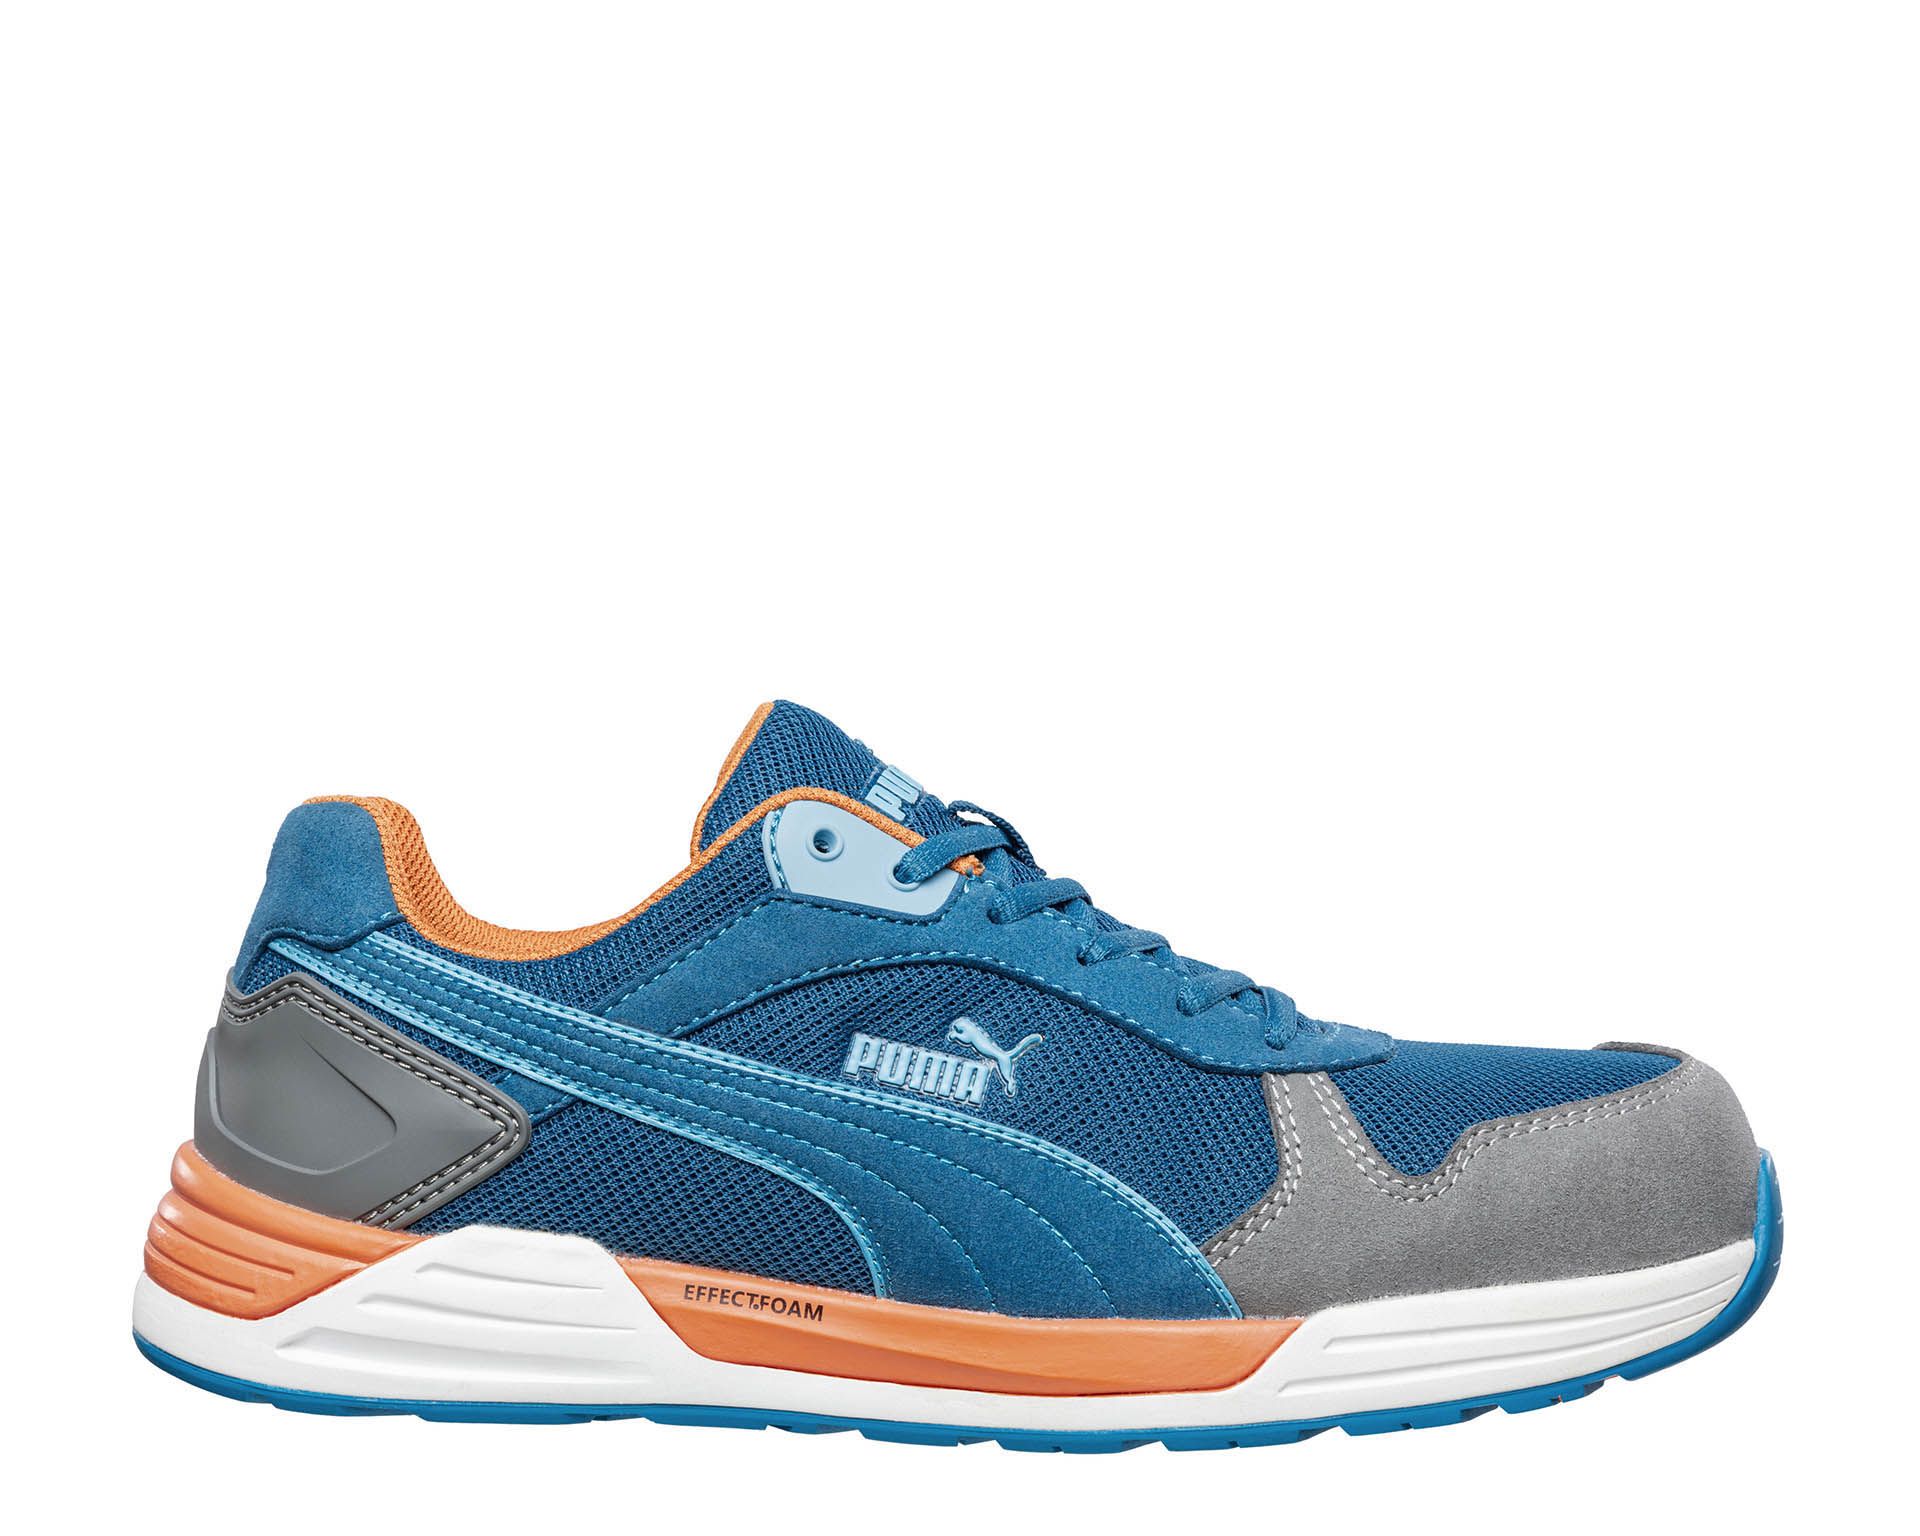 PUMA SAFETY safety shoes S1P ESD HRO SRC FRONTSIDE LOW | Puma Safety English